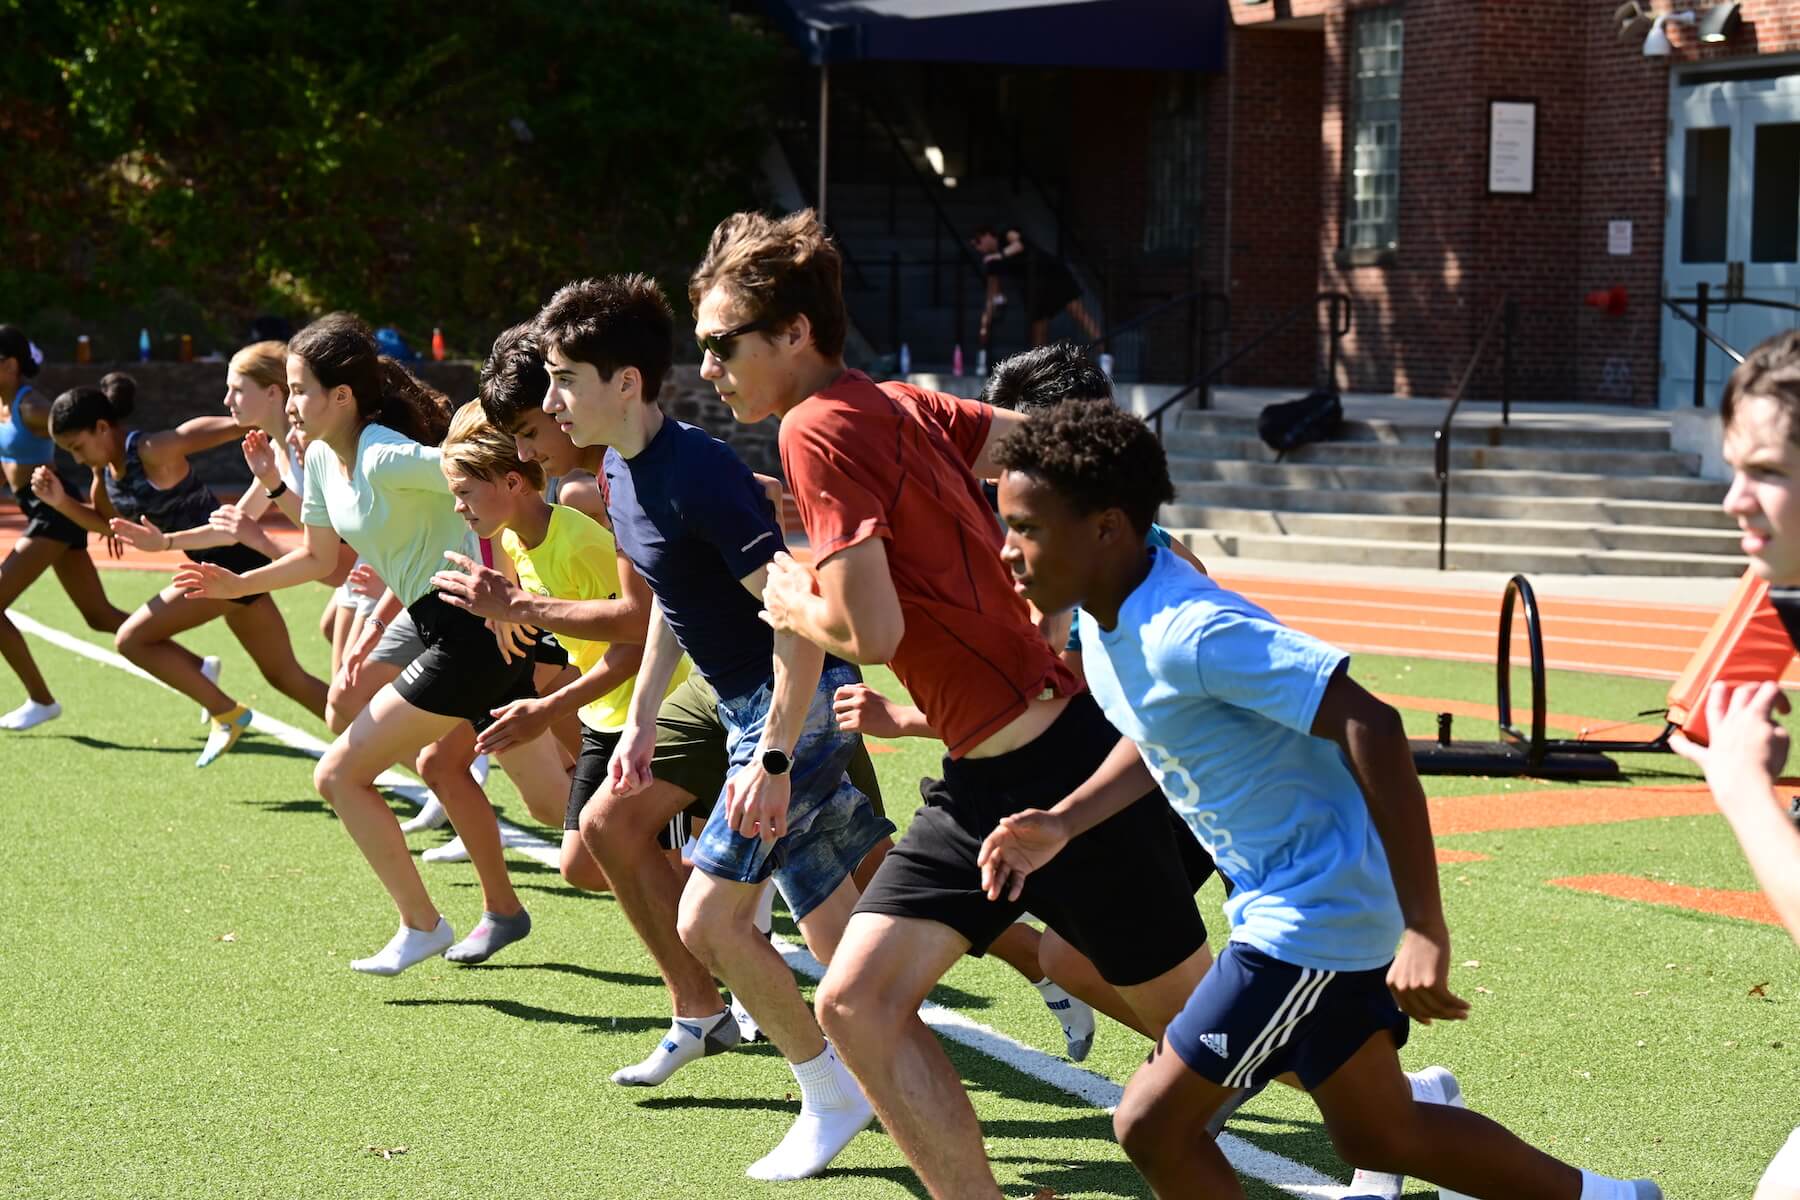 Ethical Culture Fieldston School Fieldston Upper track team practices on the field